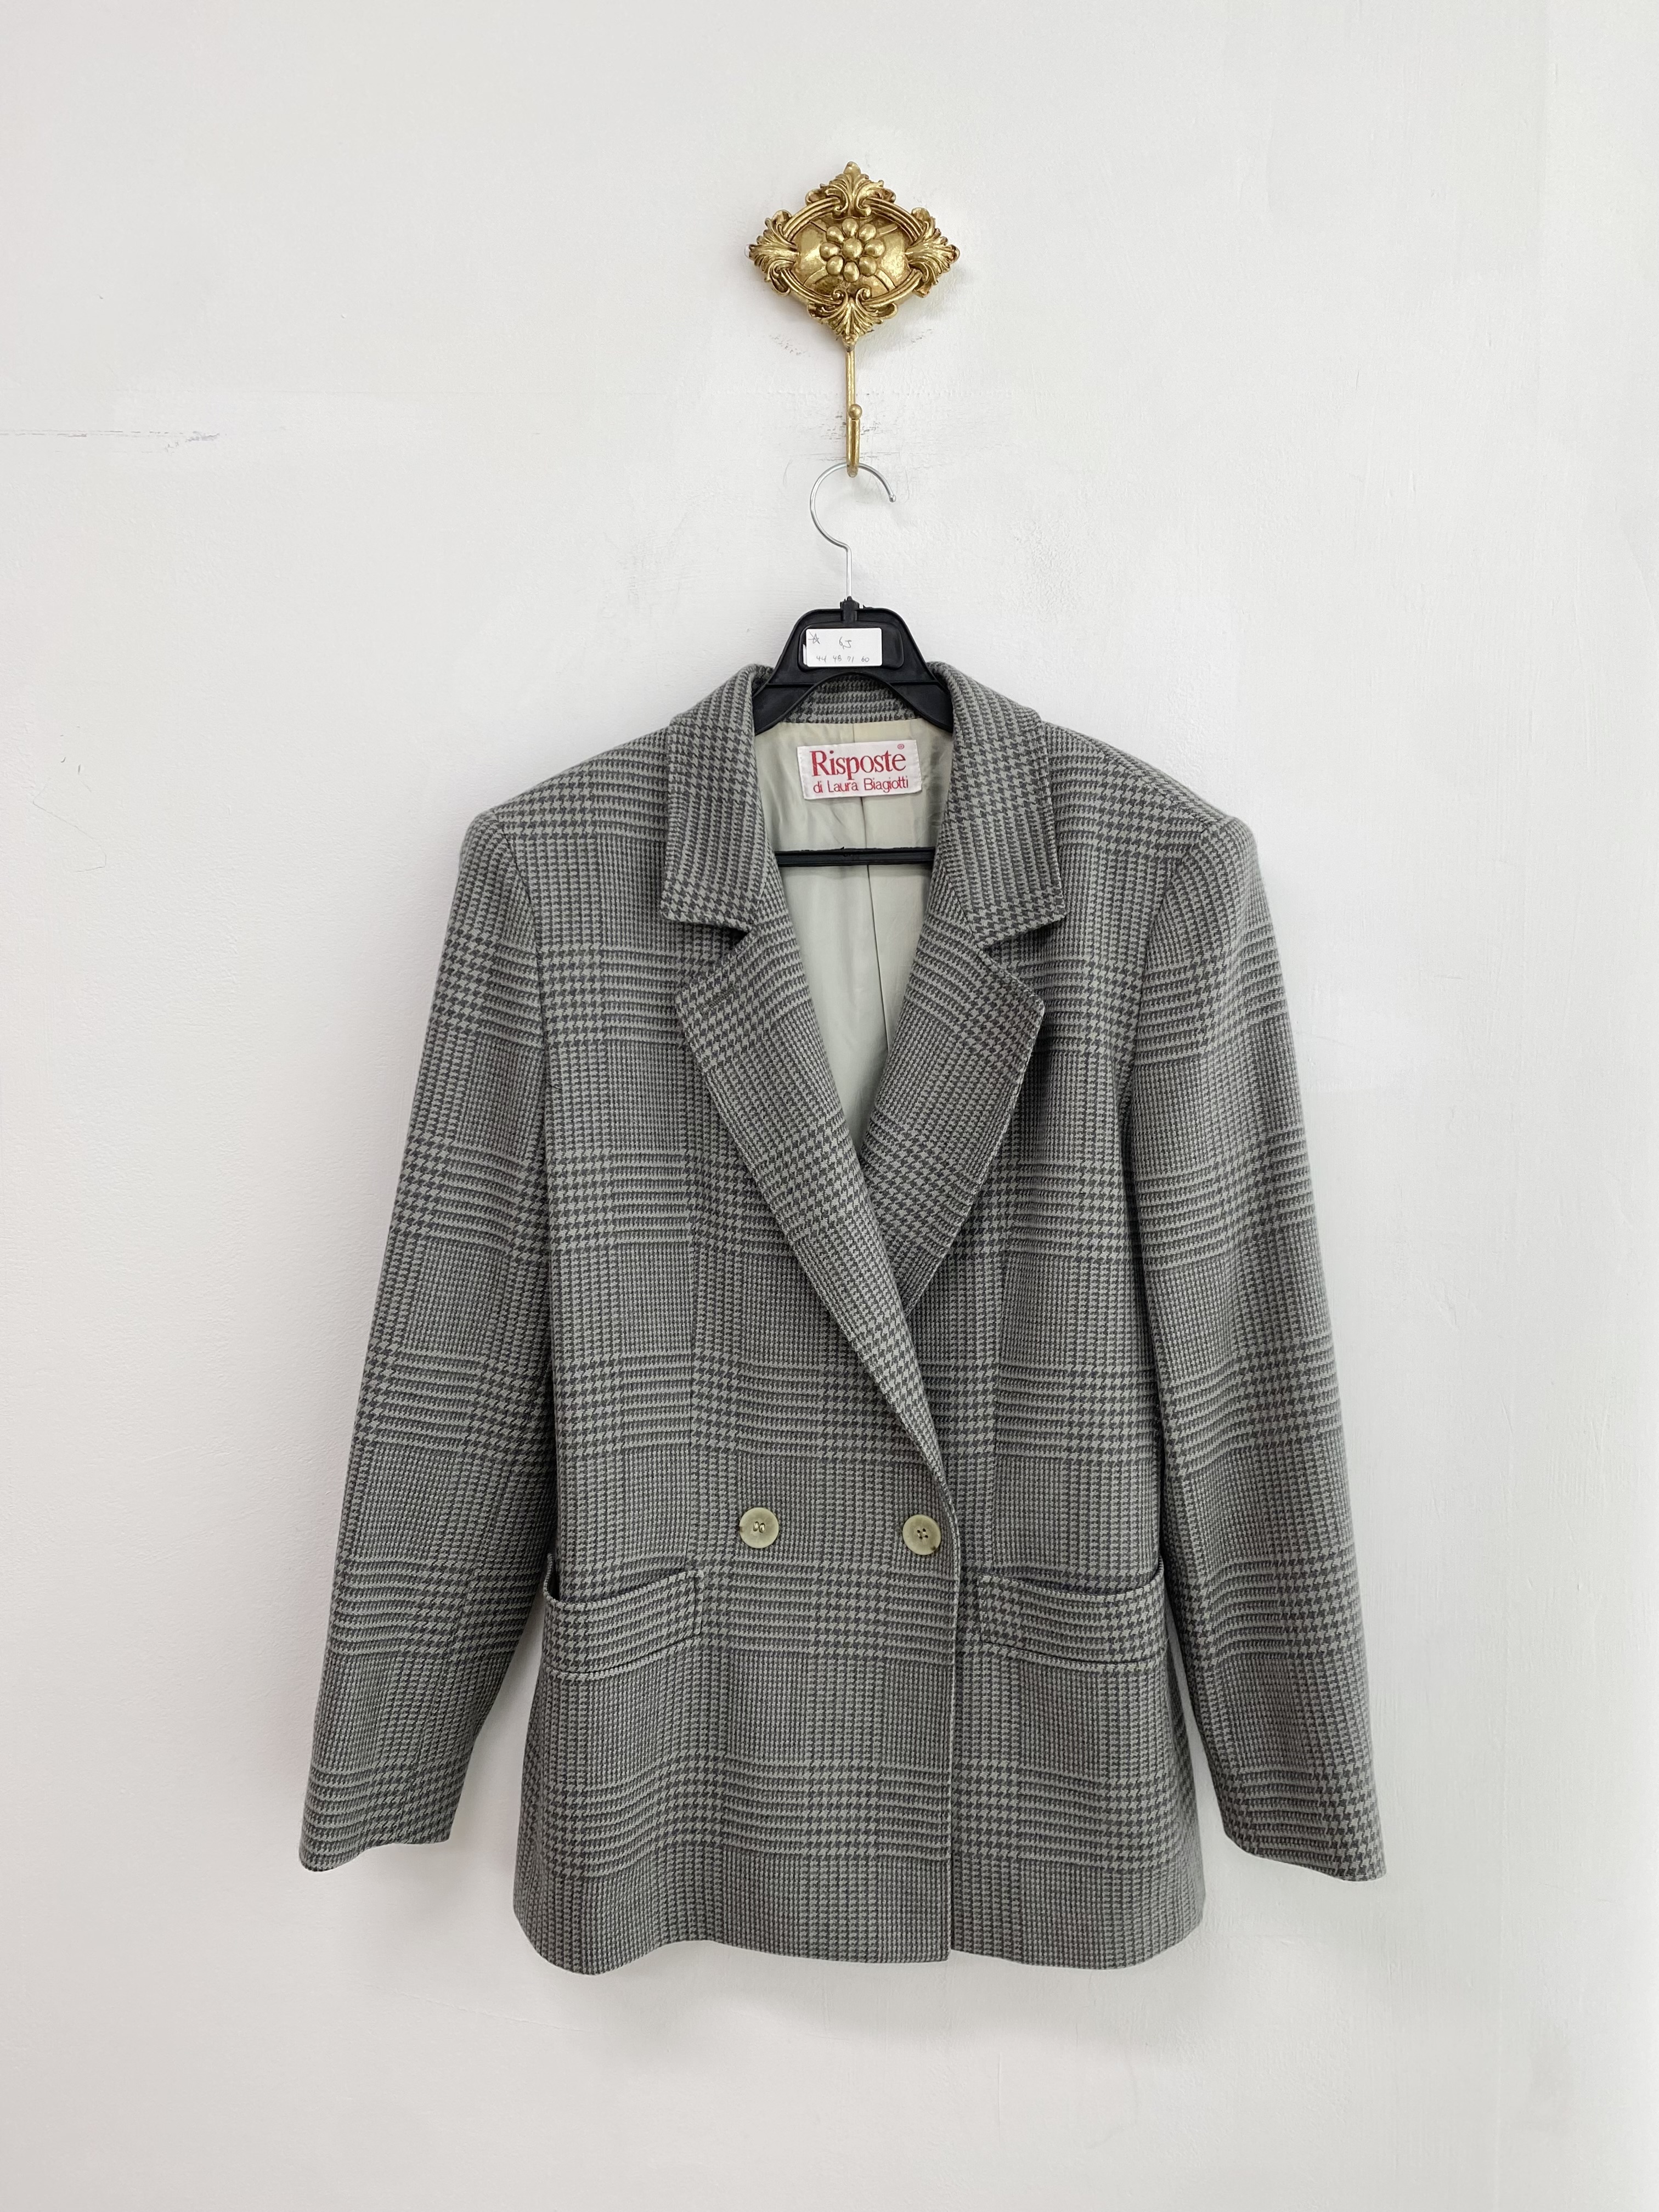 Blue grey check mix pattern wool jacket (made in italy)